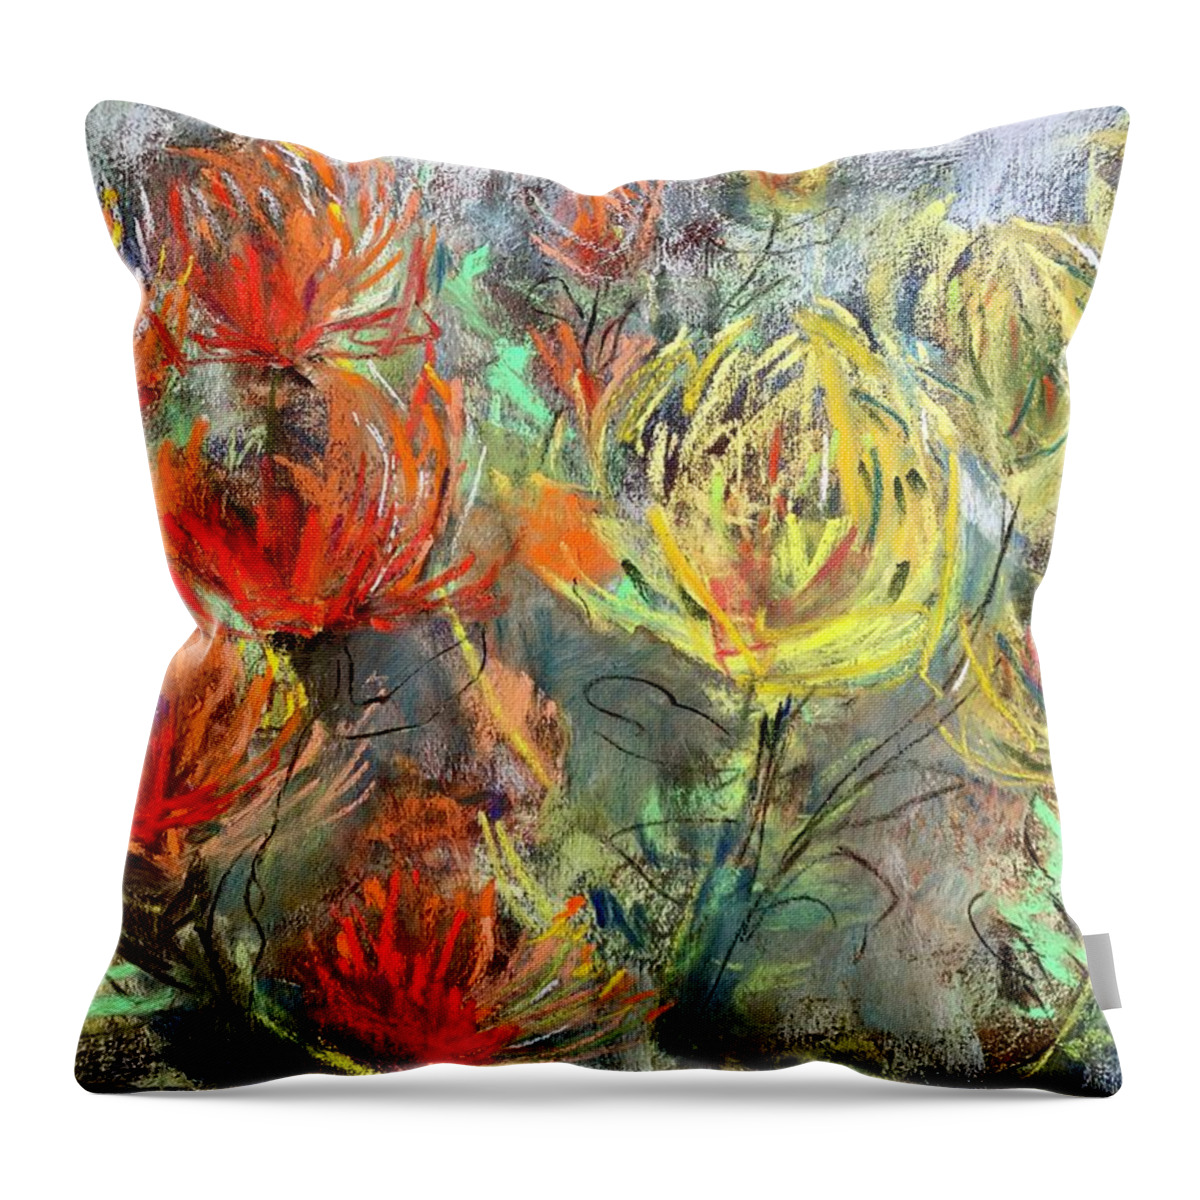 Pincushions Throw Pillow featuring the painting Pincussions by Bonny Butler